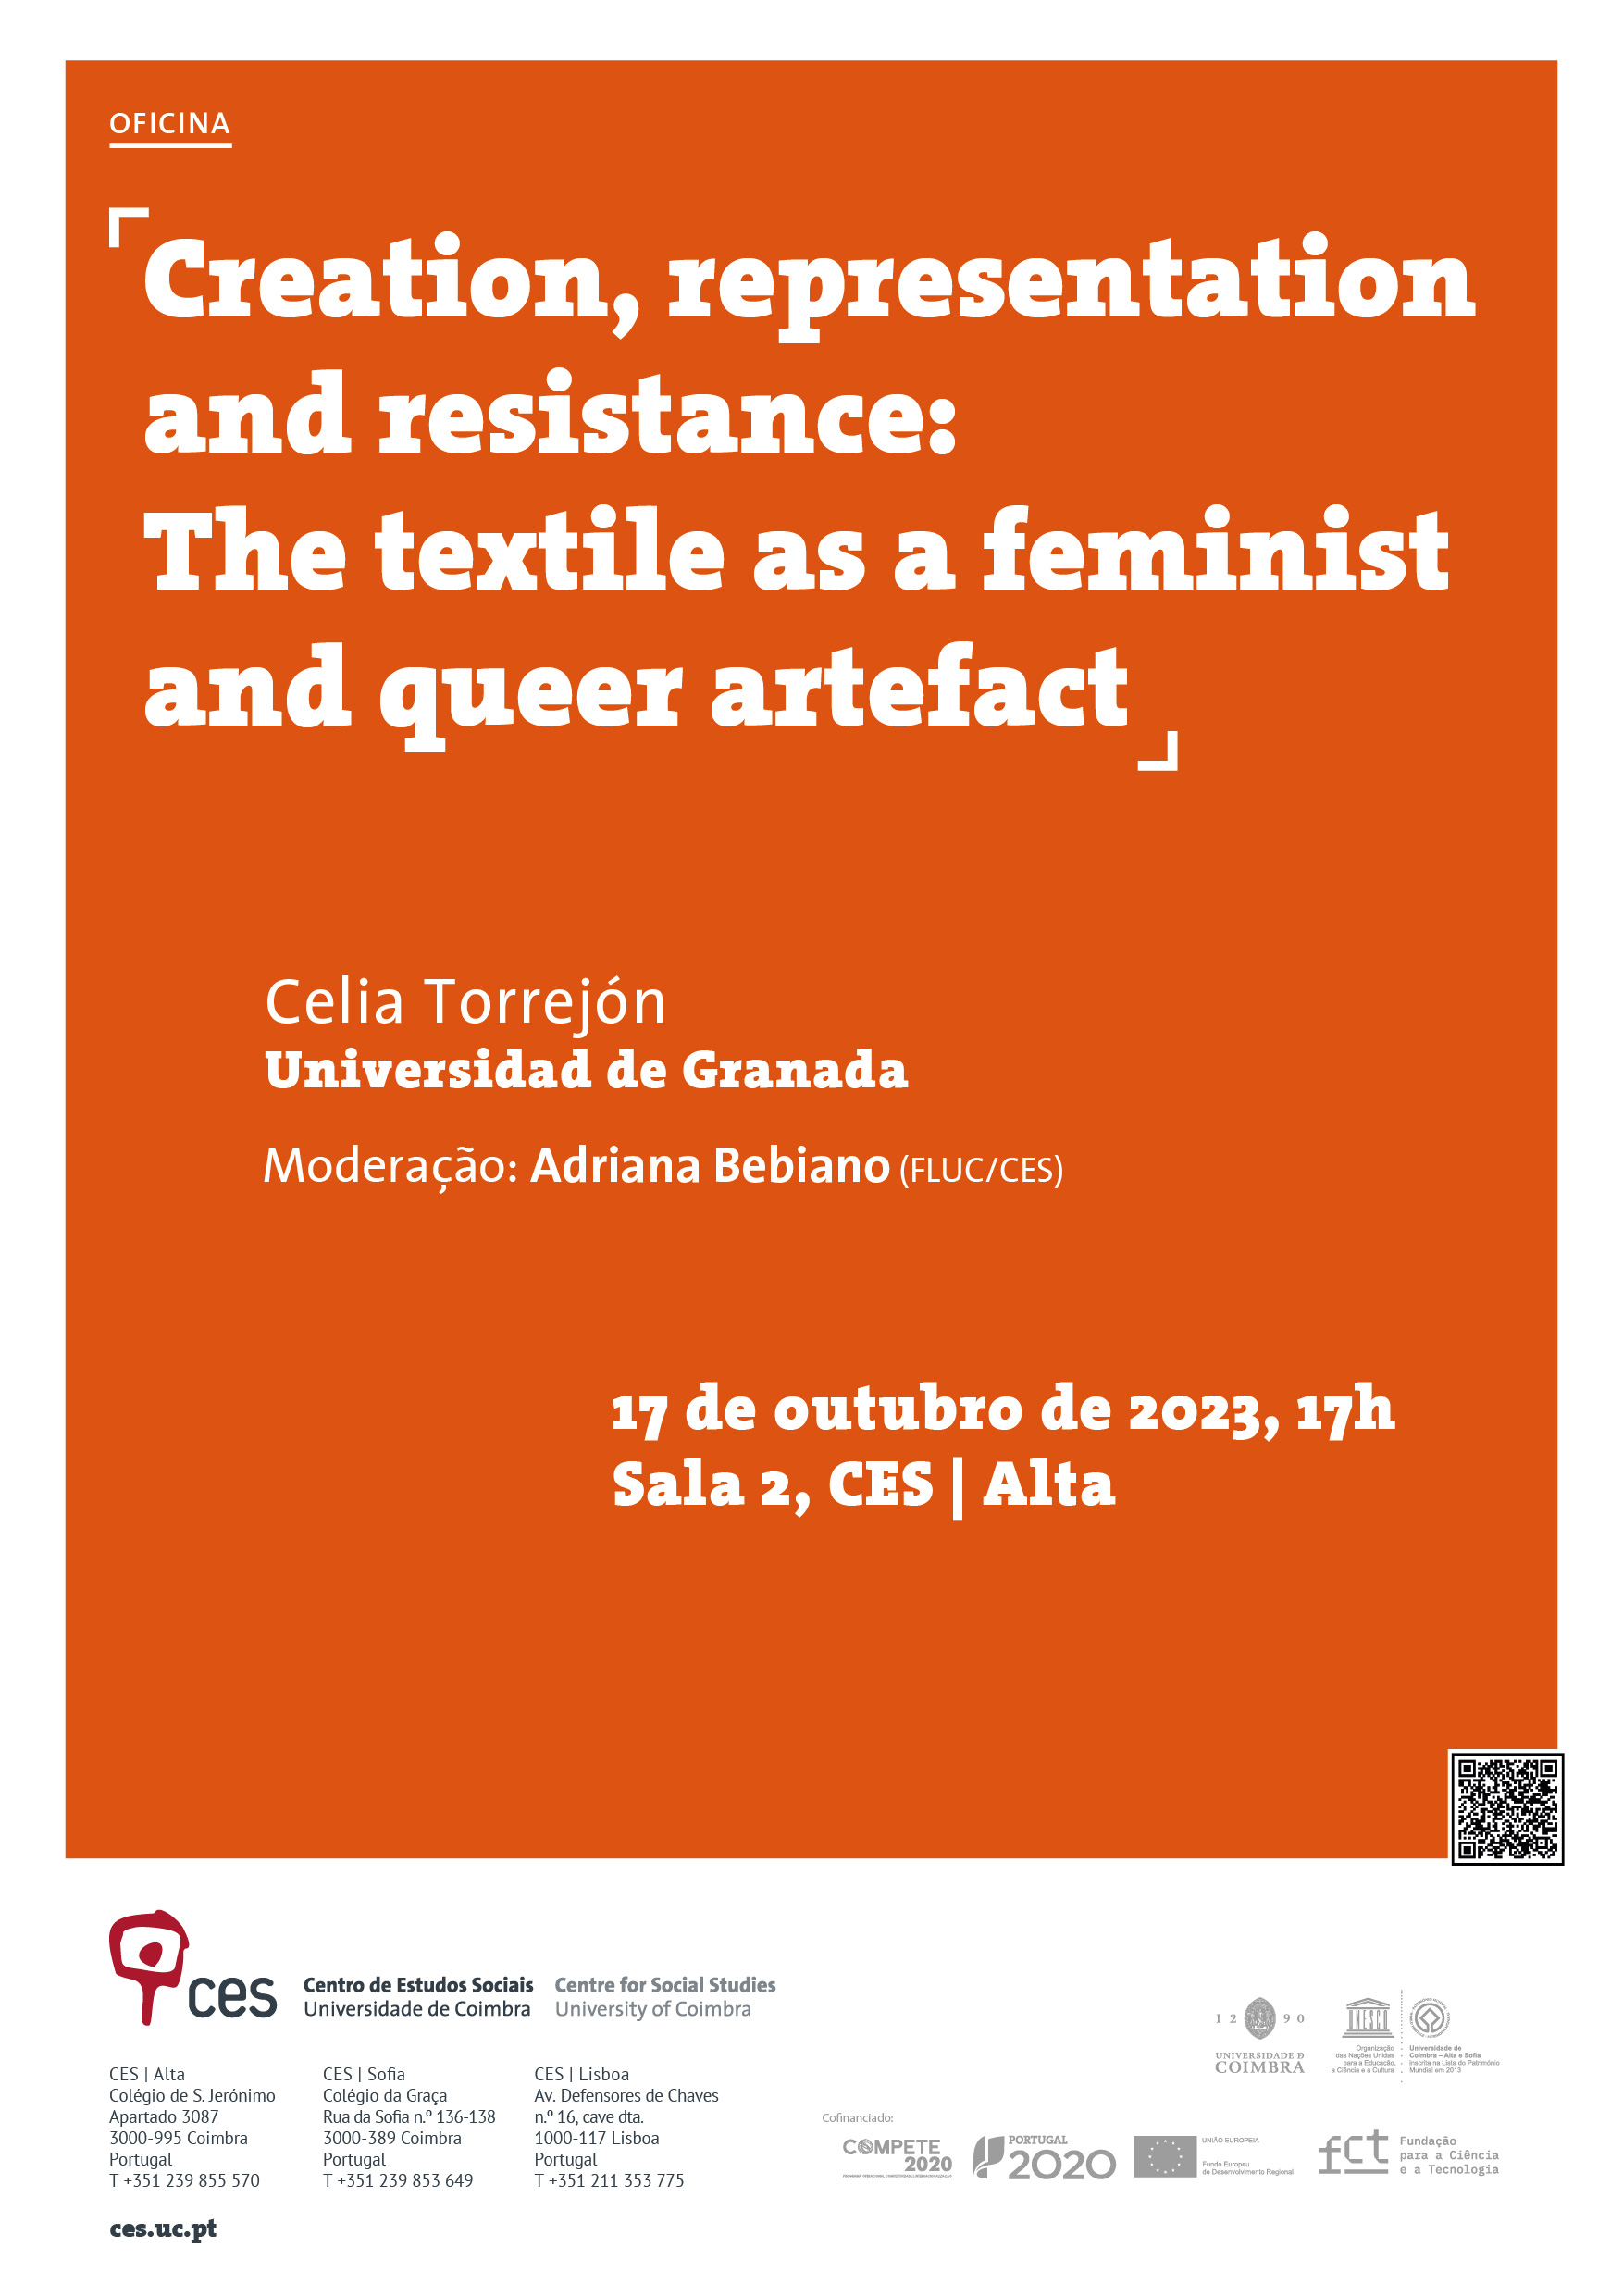 Creation, representation and resistance:  The textile as a feminist and queer artefact<span id="edit_44034"><script>$(function() { $('#edit_44034').load( "/myces/user/editobj.php?tipo=evento&id=44034" ); });</script></span>